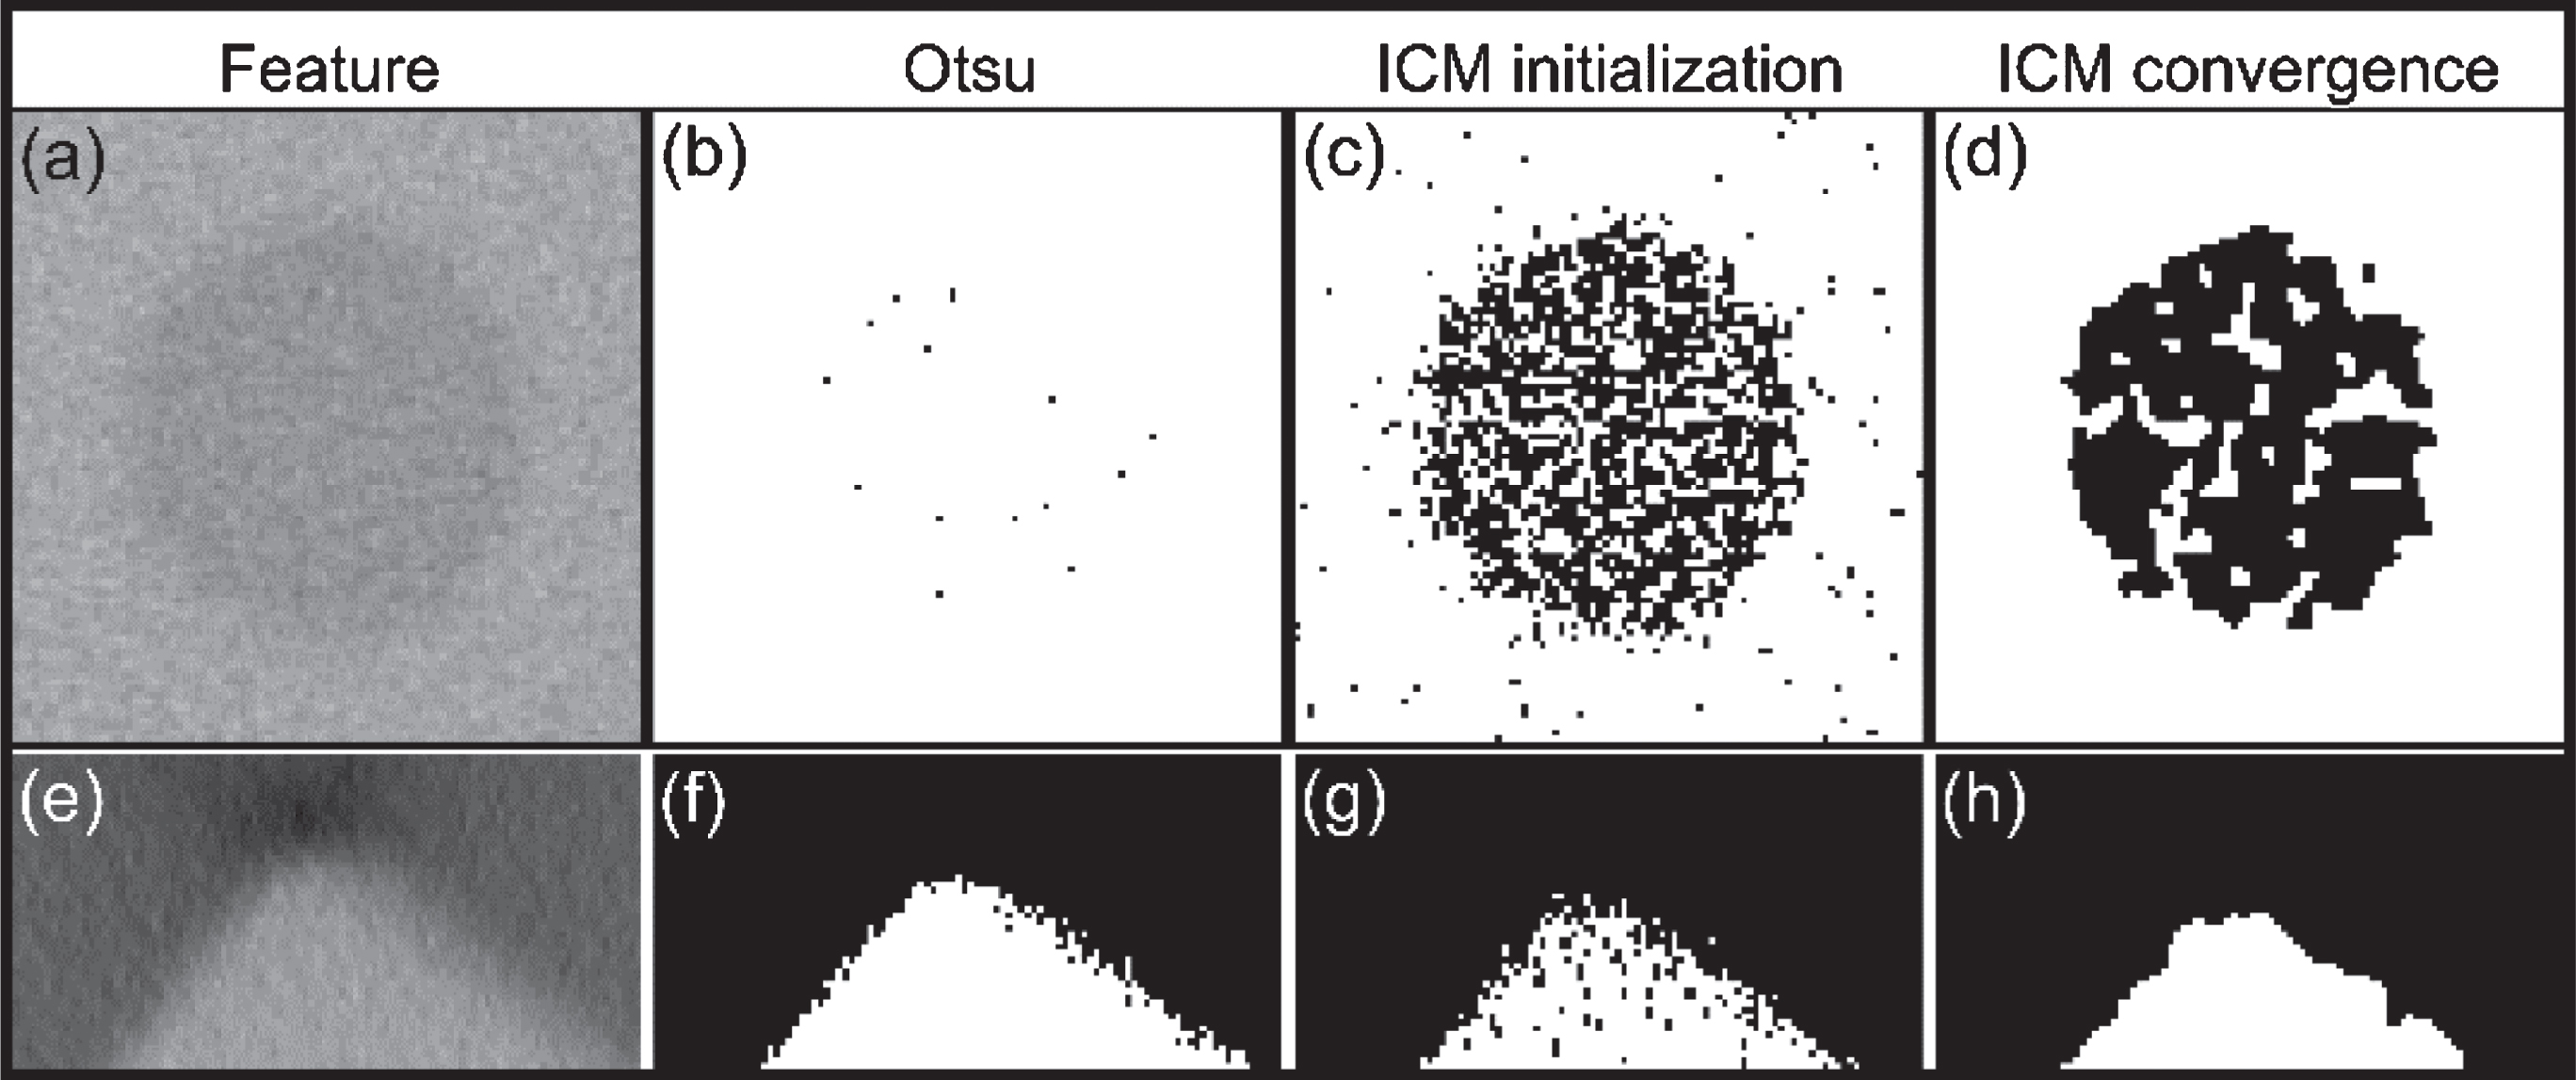 Two features from CT image in Fig. 7(a): (a) a hole and its Otsu segmentation, ICM initialization and MRF segmentation result in (b), (c) and (d) respectively, and (e) a corner and its Otsu segmentation, ICM initialization and MRF segmentation result in (f), (g) and (h) respectively. Note that methods are applied to the whole image and cropped sections are shown here.